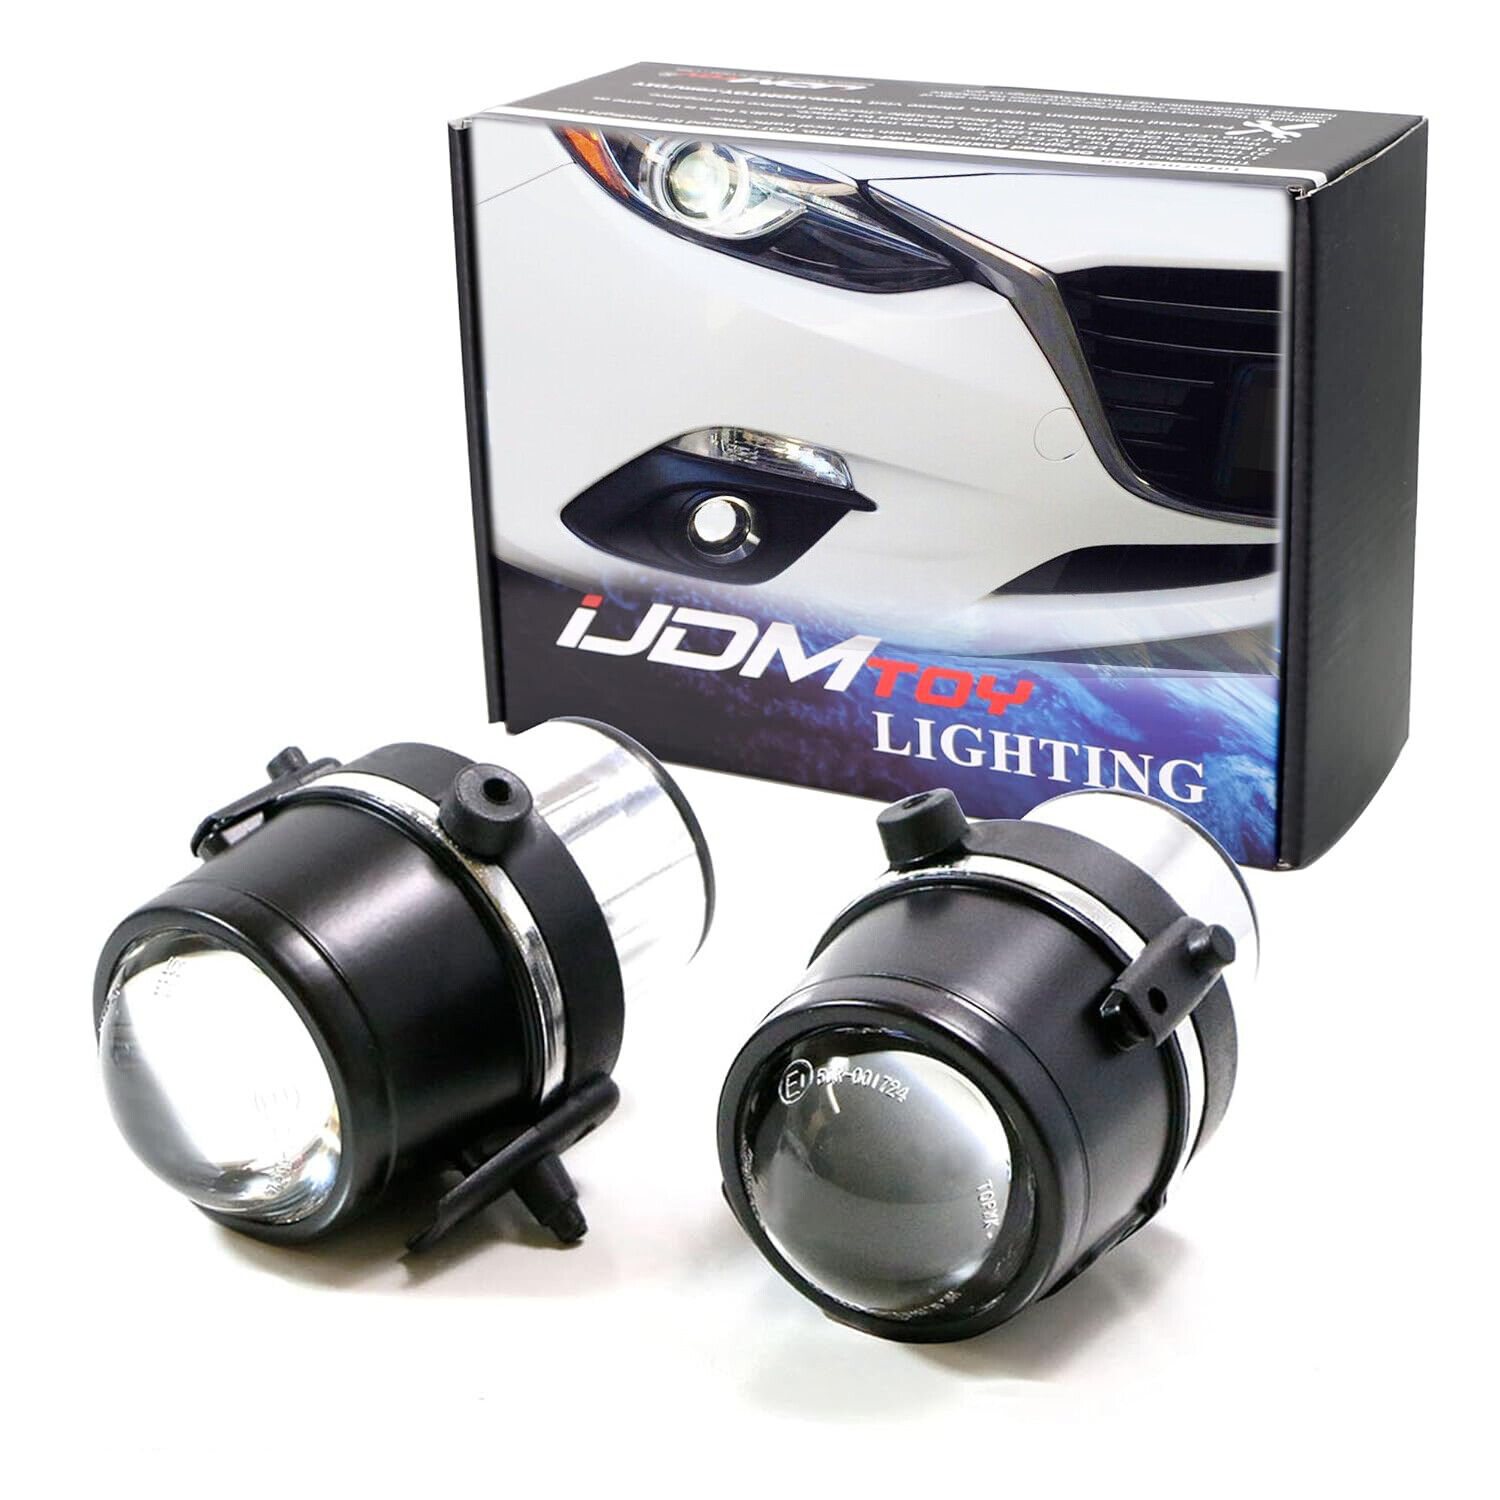 Direct Fit Projector Fog Lamps For Mazda 3 5 6 MX-5 CX-7 (HID Lights Compatible)